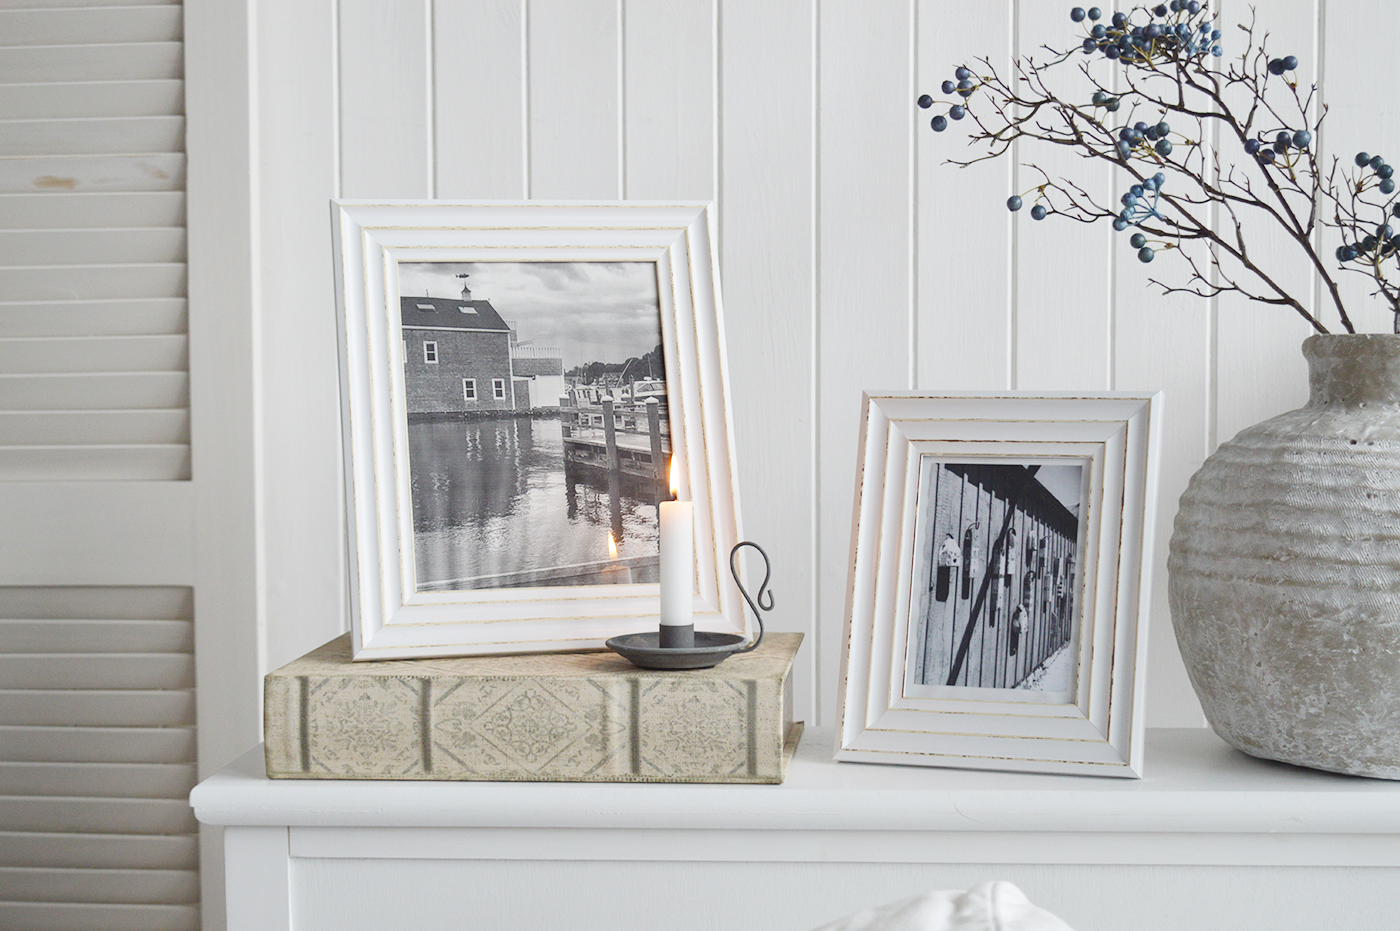 Colebrook white photo frames in distressed finish for modern farmhouse, country and coastal New England style homes and interiors. Available in 4x6, 5x7 and 10x8